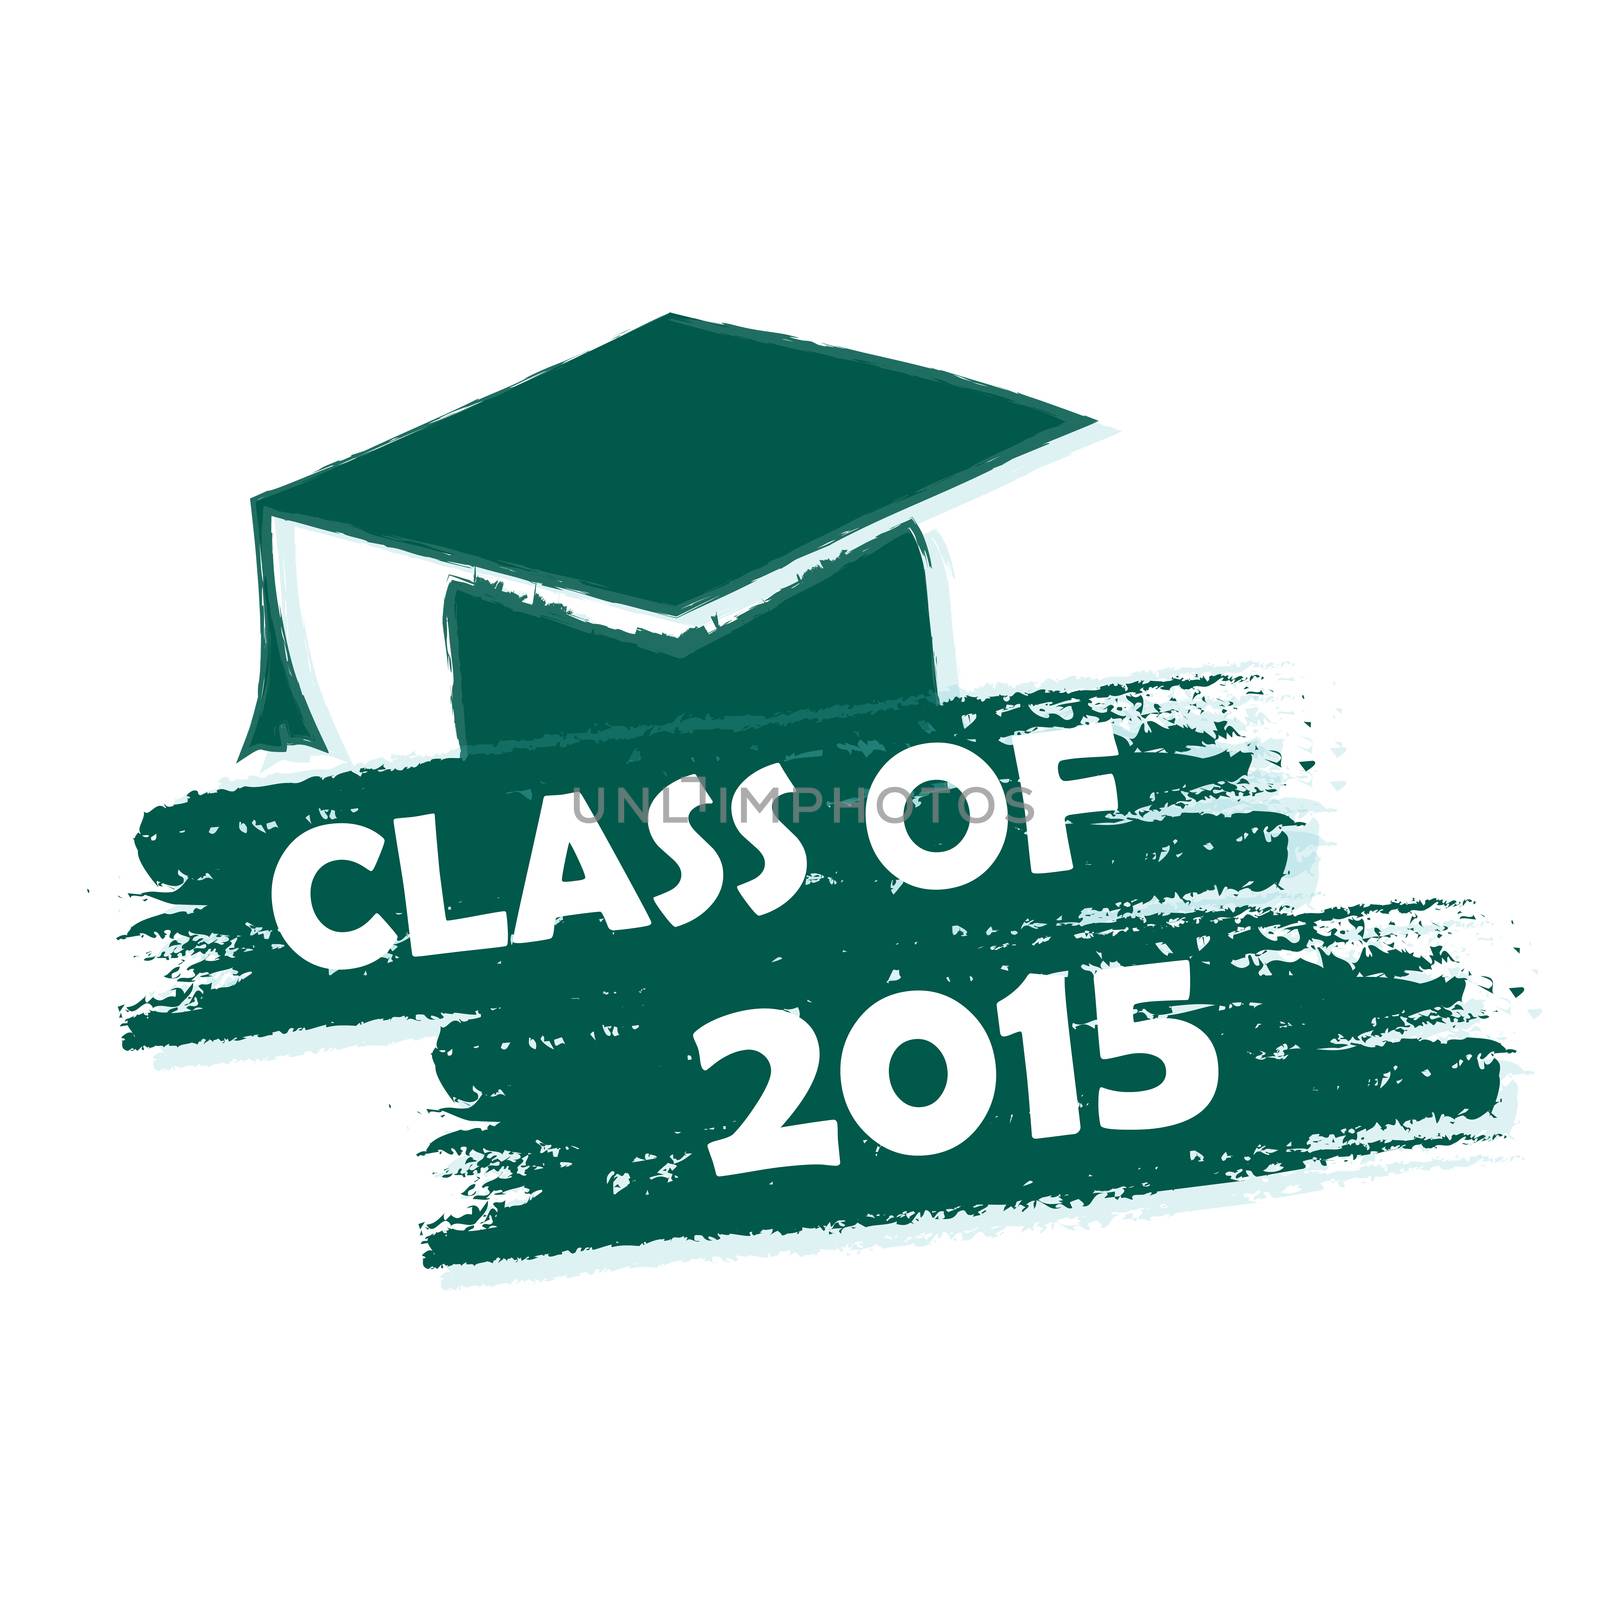 class of 2015 text with graduate cap with tassel - mortarboard, graduate education concept, drawn